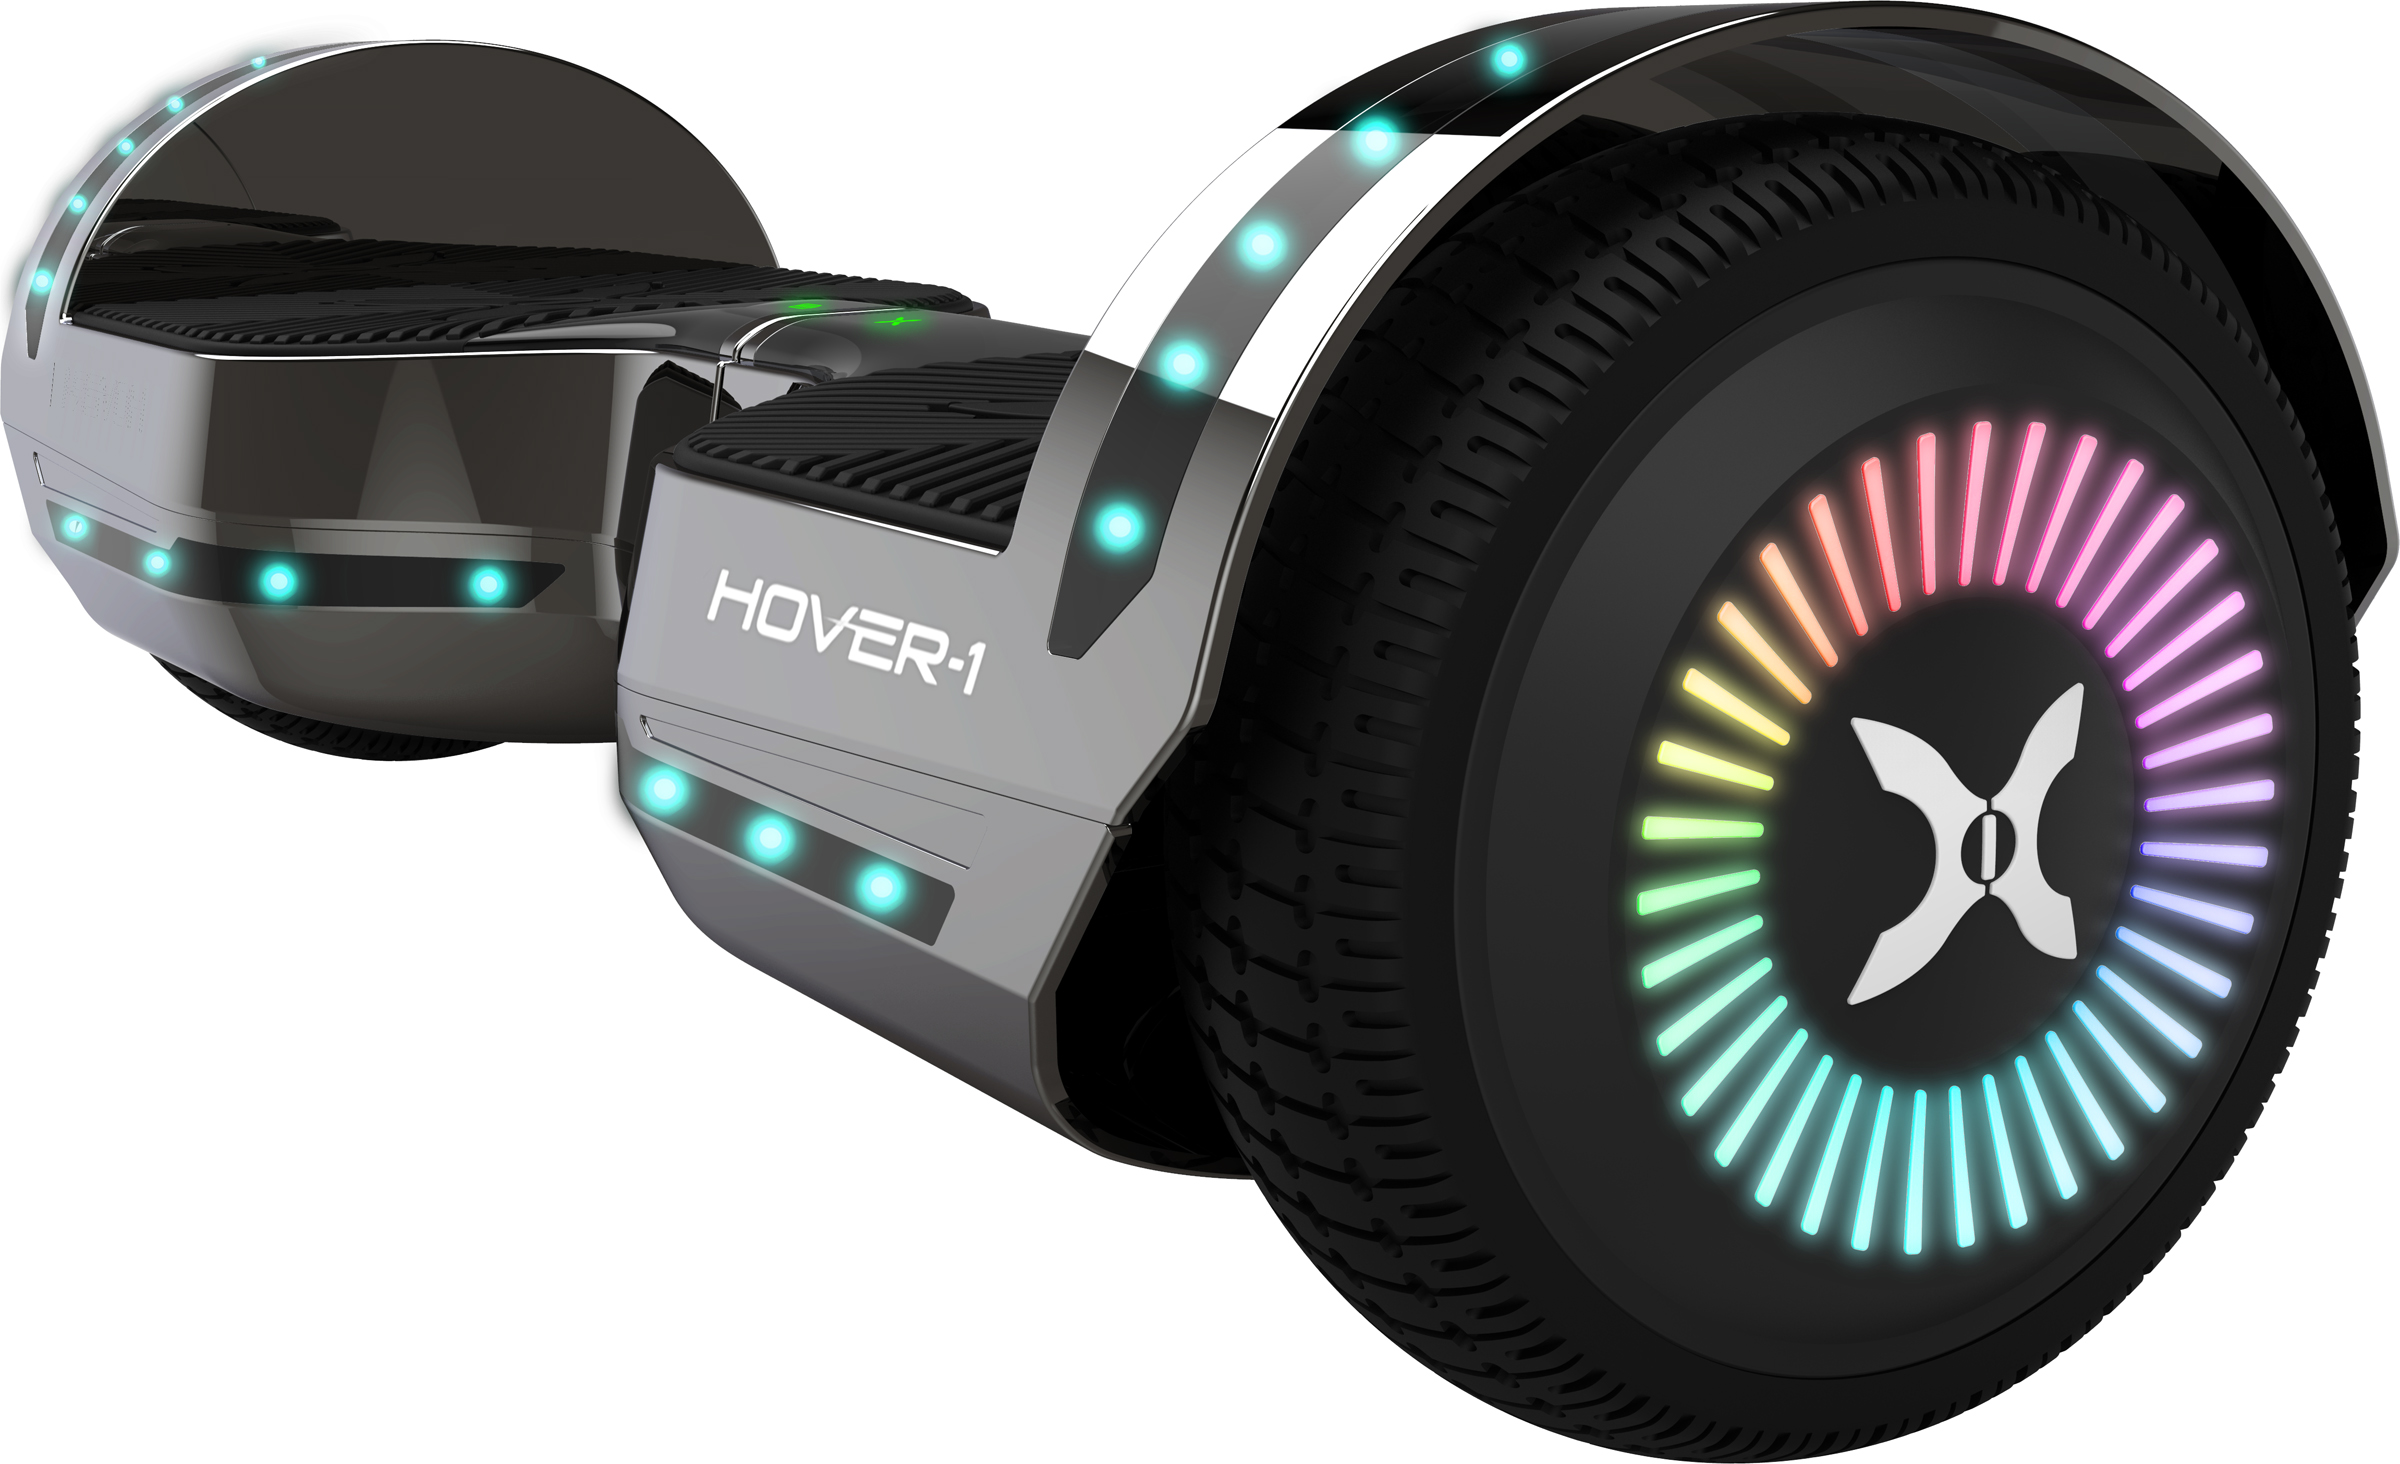 Hover-1 Chrome 7 Mph Hoverboard with LED Lights and Bluetooth Speaker, 6.5 In. Tires, 220 Lbs. Max Weight, Gunmetal - image 5 of 8